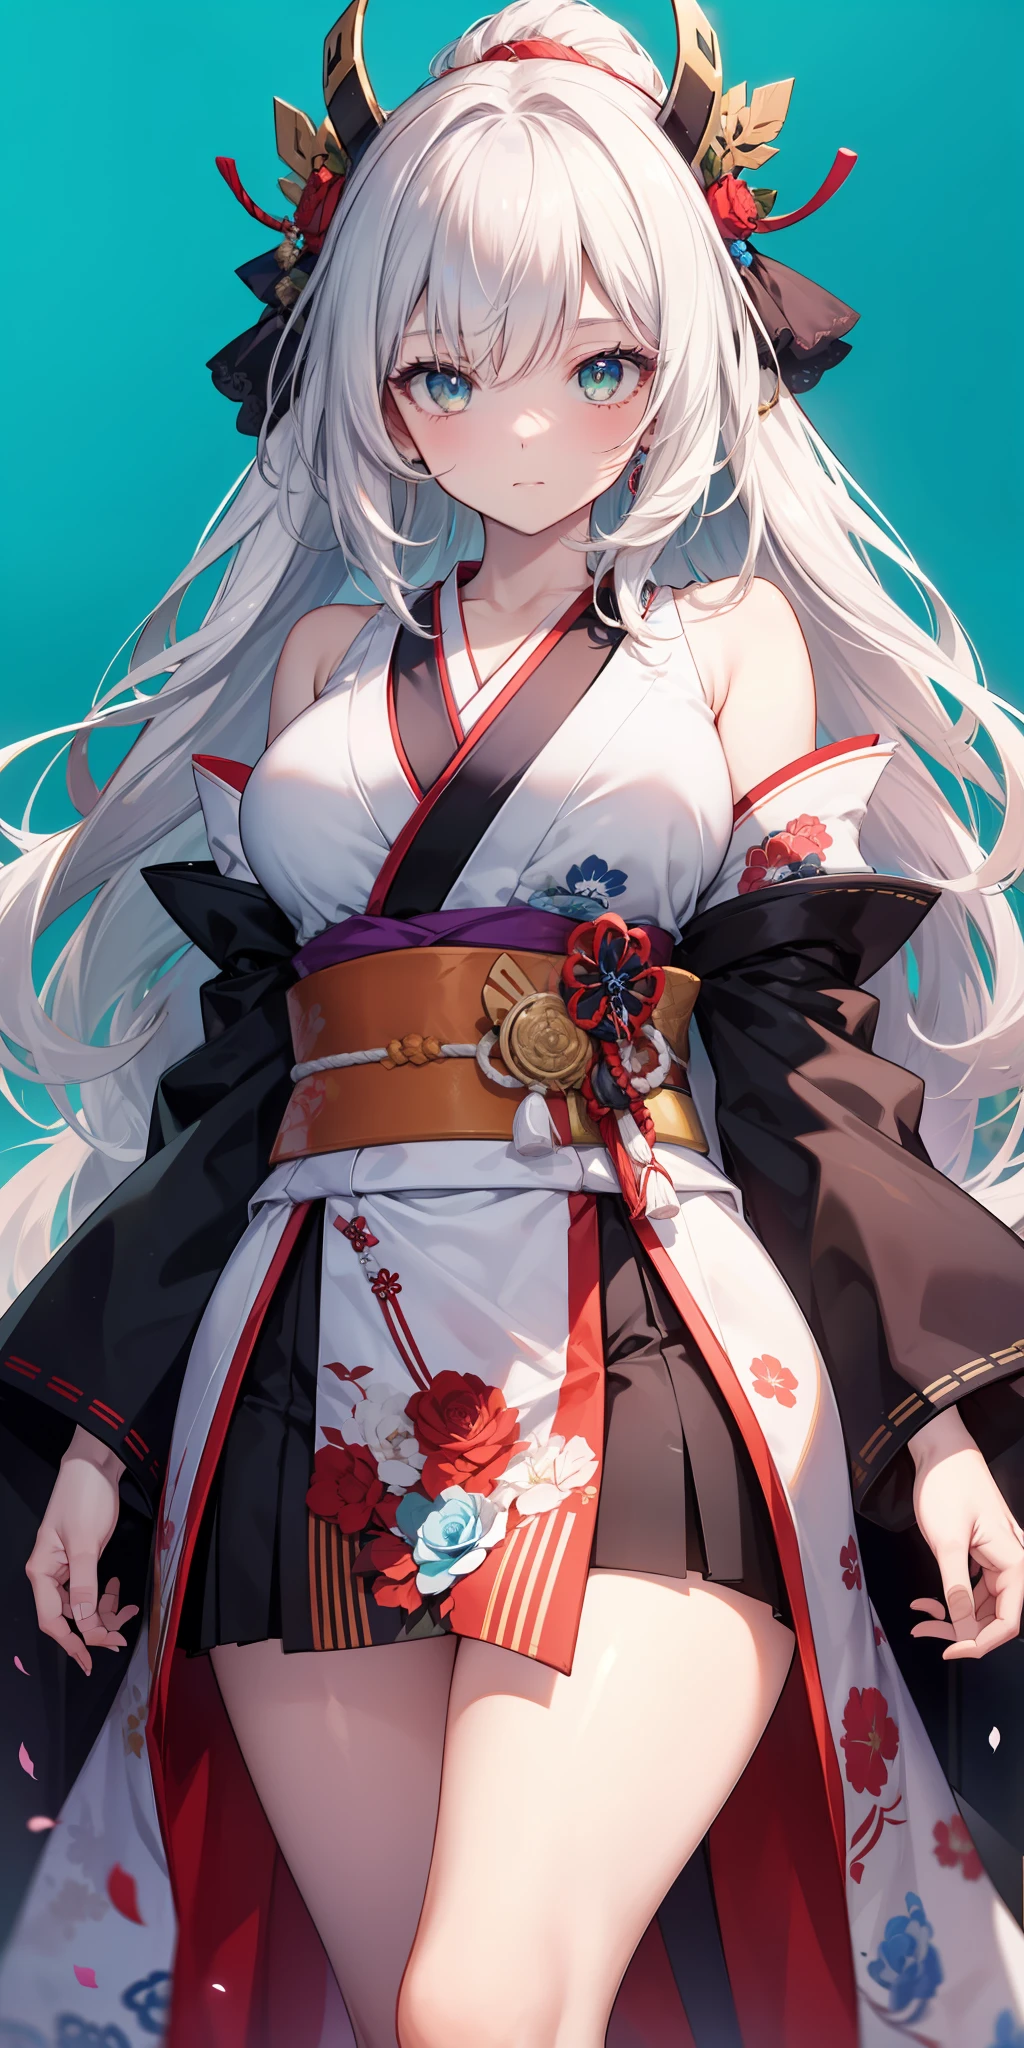 ((best quality)), ((masterpiece)), (detailed), Japanese style, samurai style, Mitsuri Kanroji character, 1girl best quality, portrait, ultra detailed, pretty face, perfect anatomy, soil, pale skin, hair giant green rose, perfect hair, bangs, eyes, pupil, perfect outfit, arms, hands, thick legs, big thigh, possession, blue background, fortnite,
   INFO